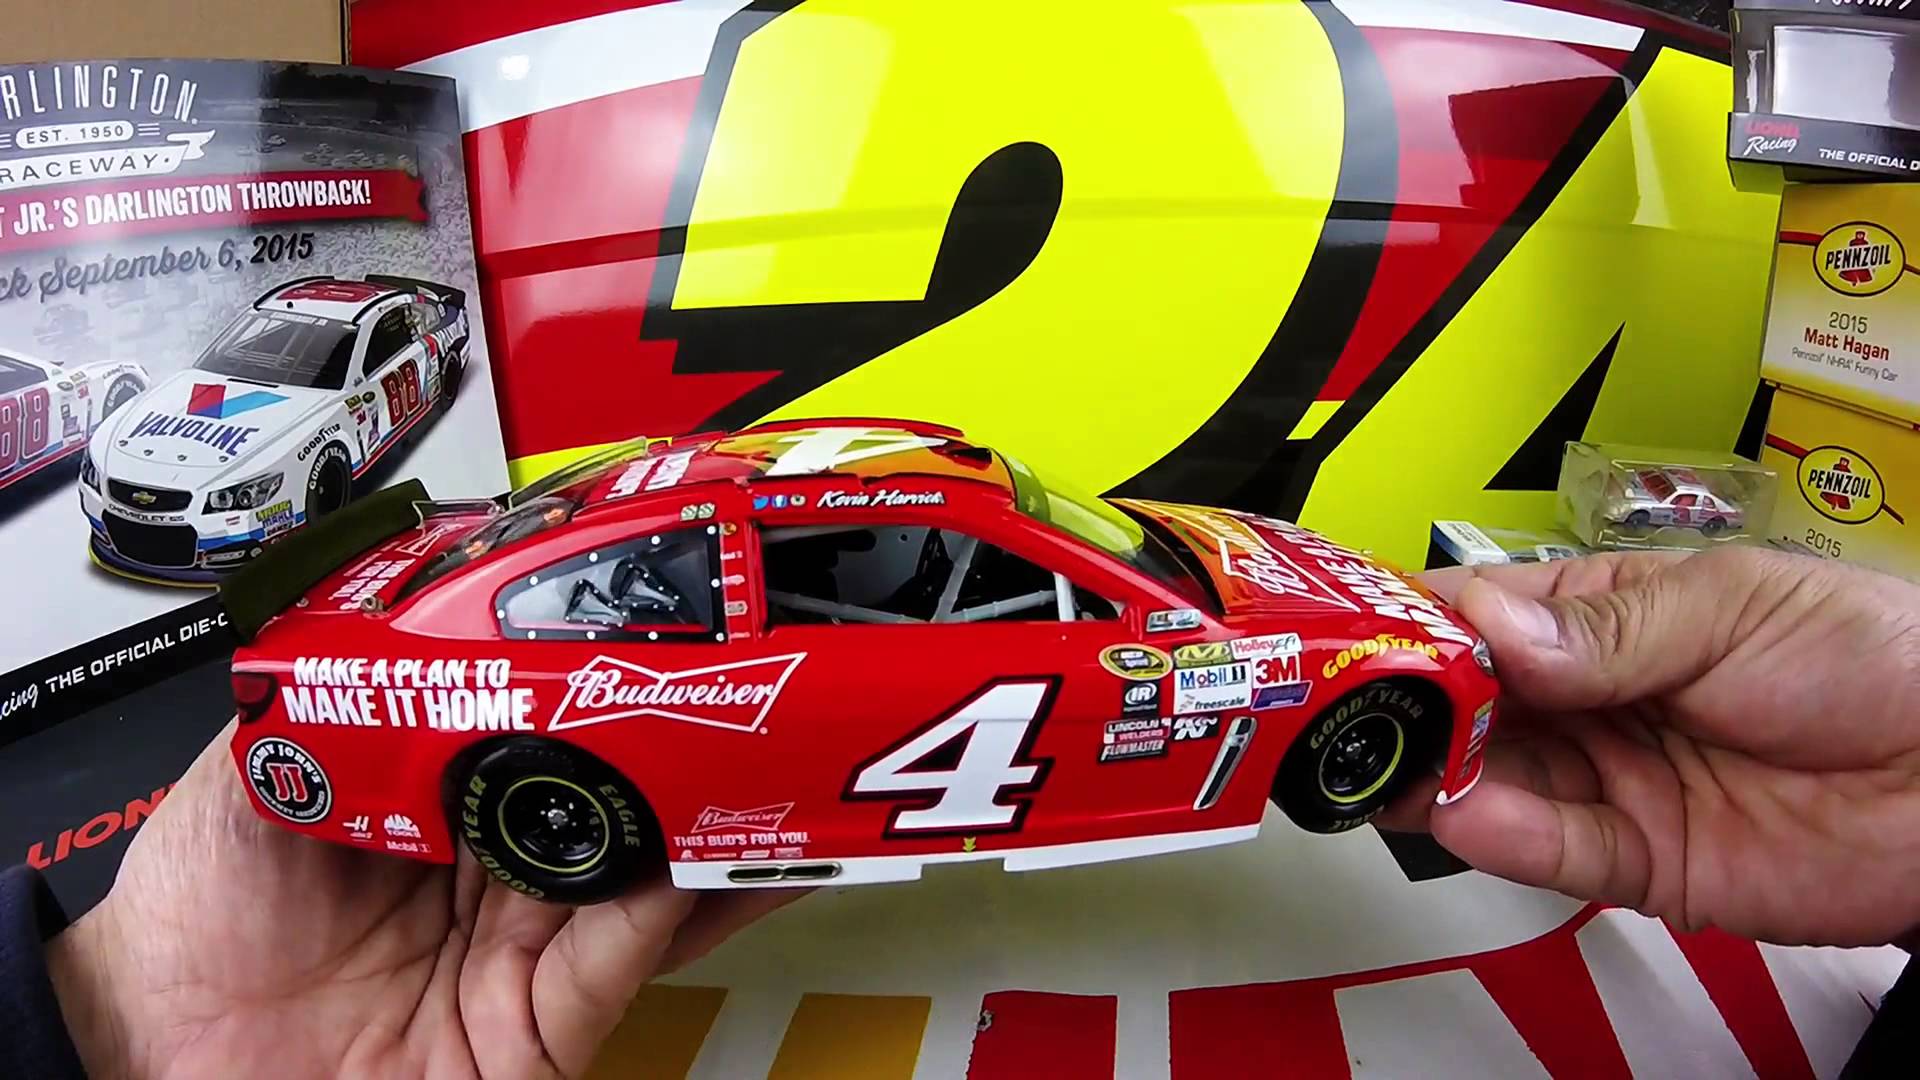 Unbxoing The 2015 Kevin Harvick Make A Plan 1 24 NASCAR Diecast